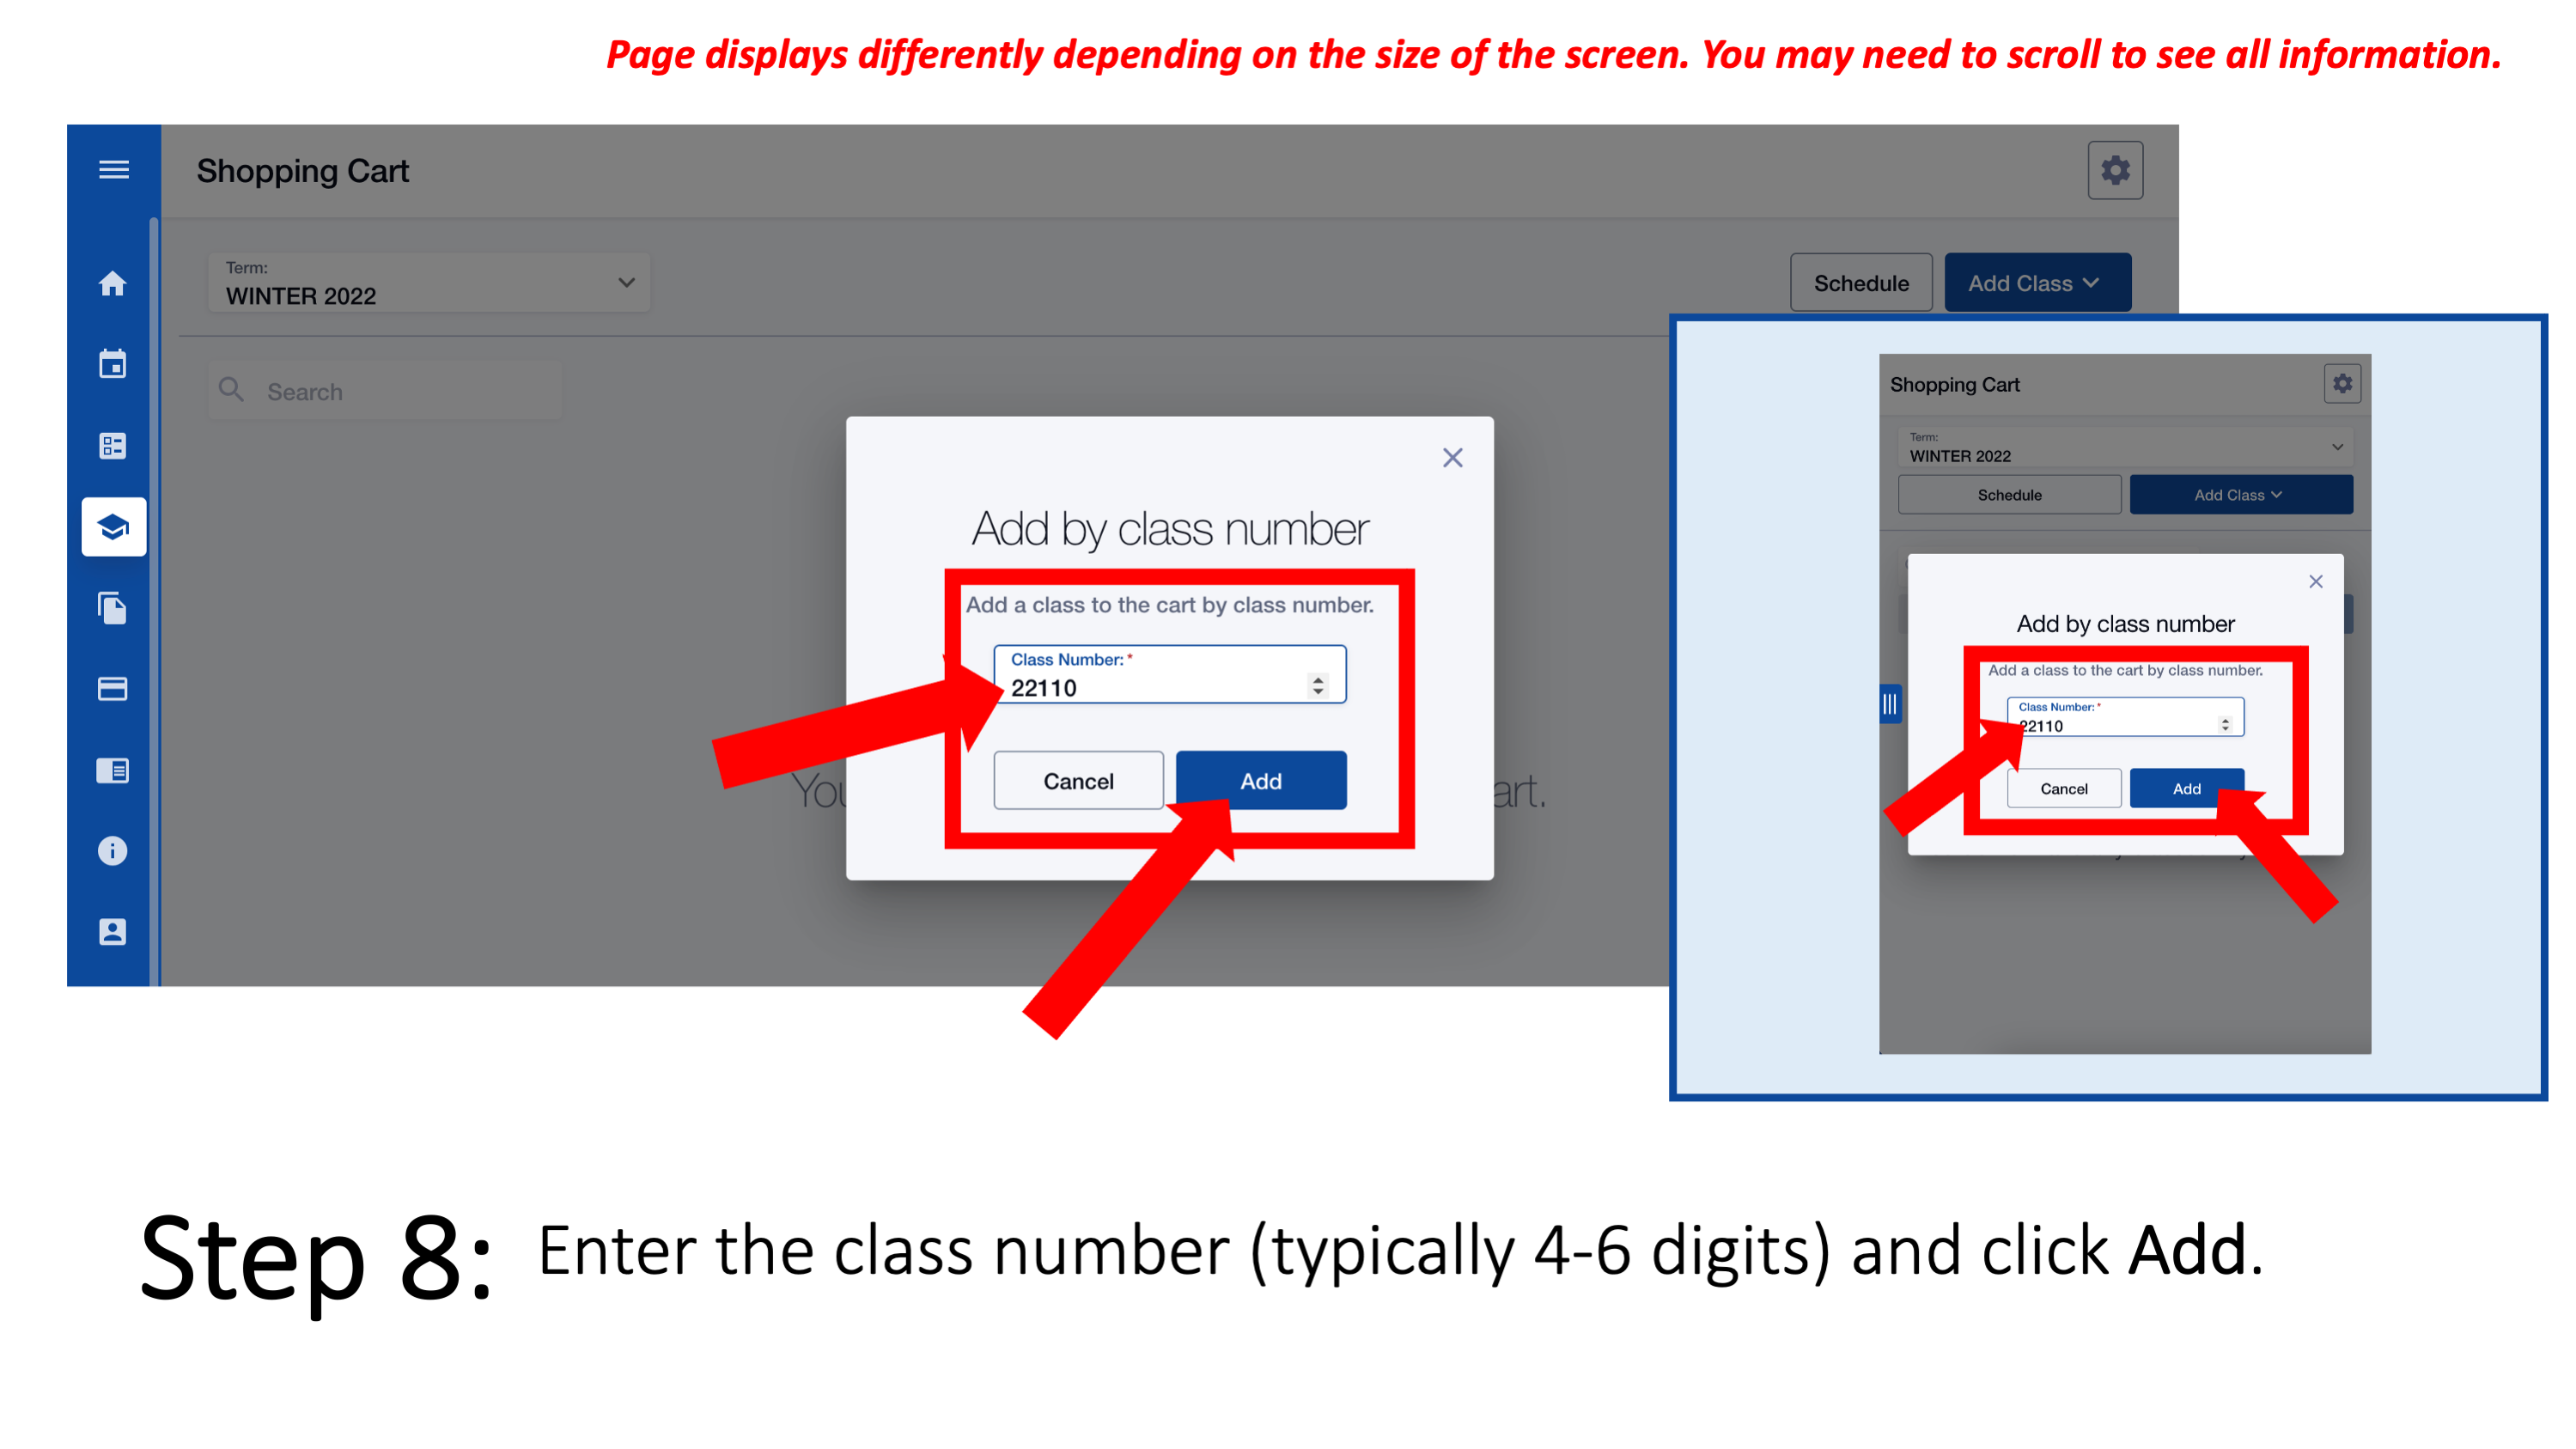 Step 8: Enter the class number (typically 4-6 digits) and click Add.